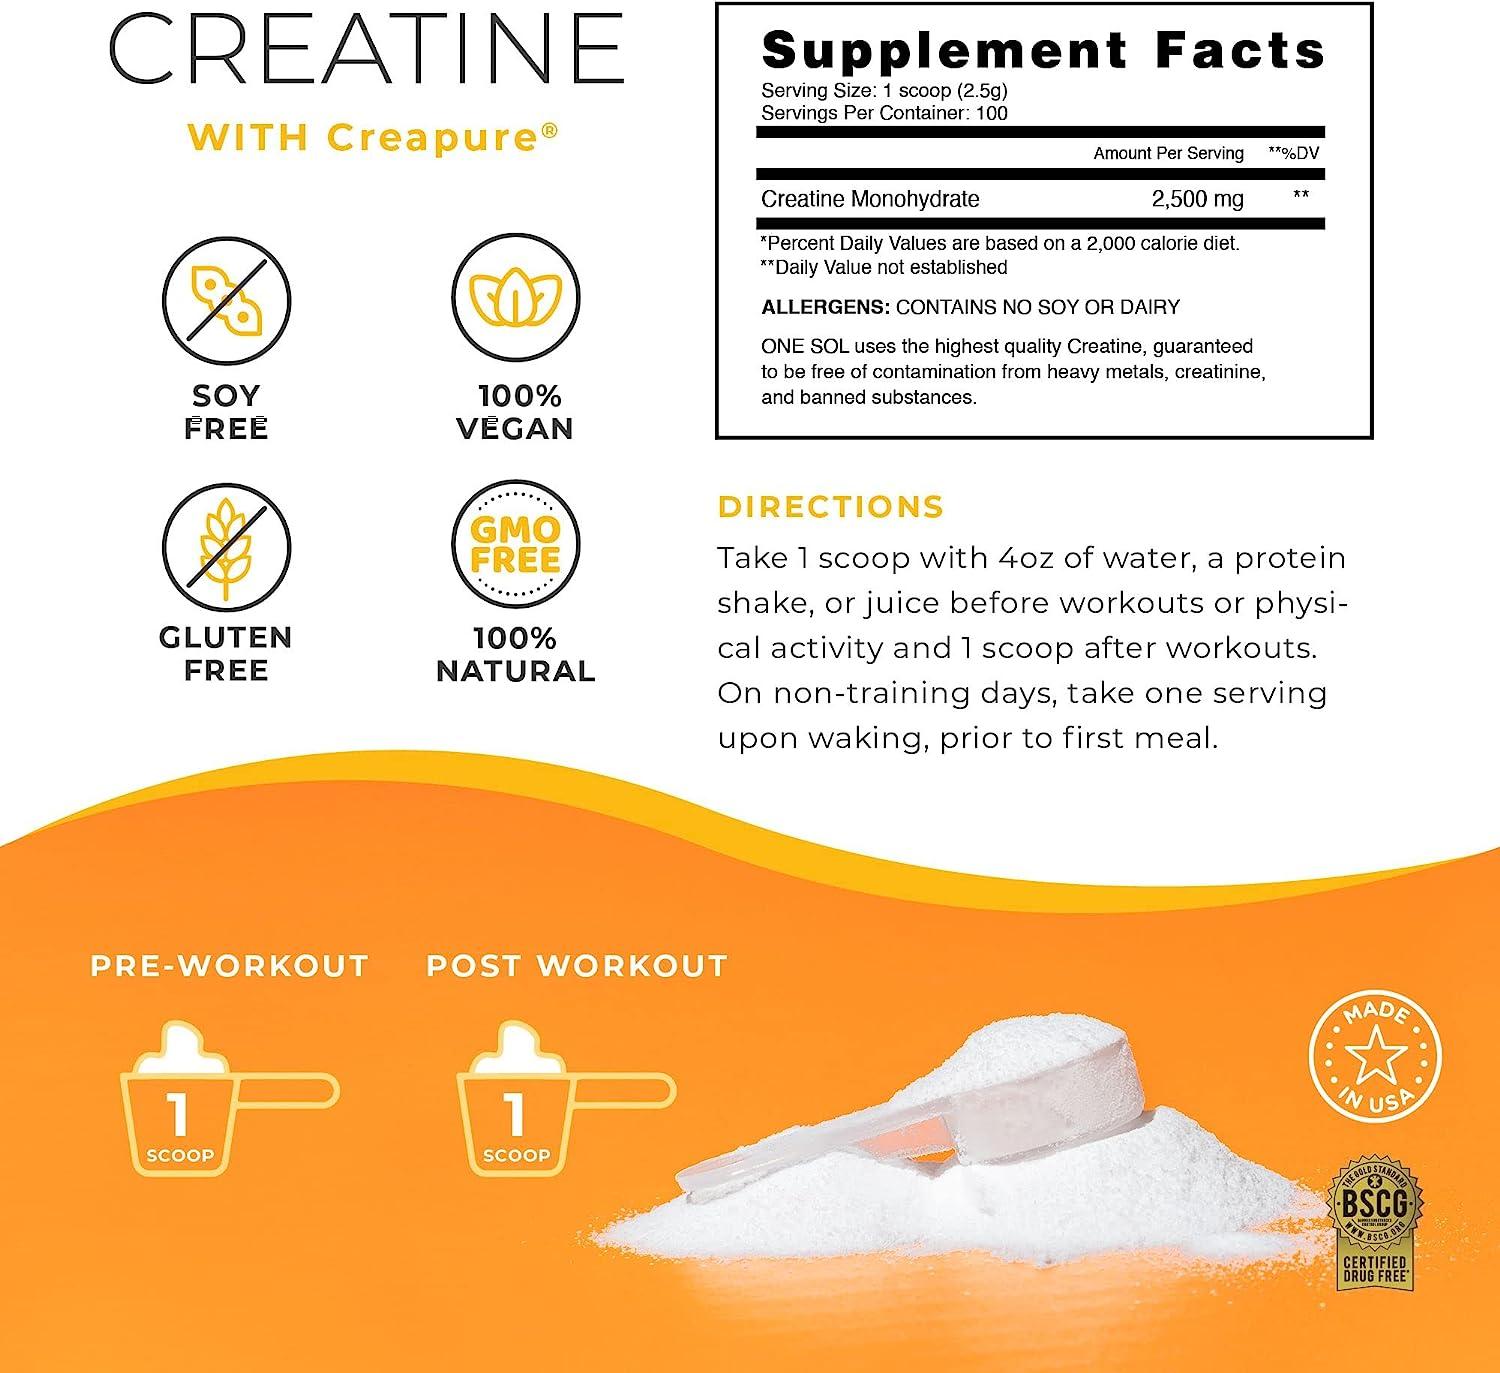 One Sol Creatine for Women Booty Gain, All Natural Women's